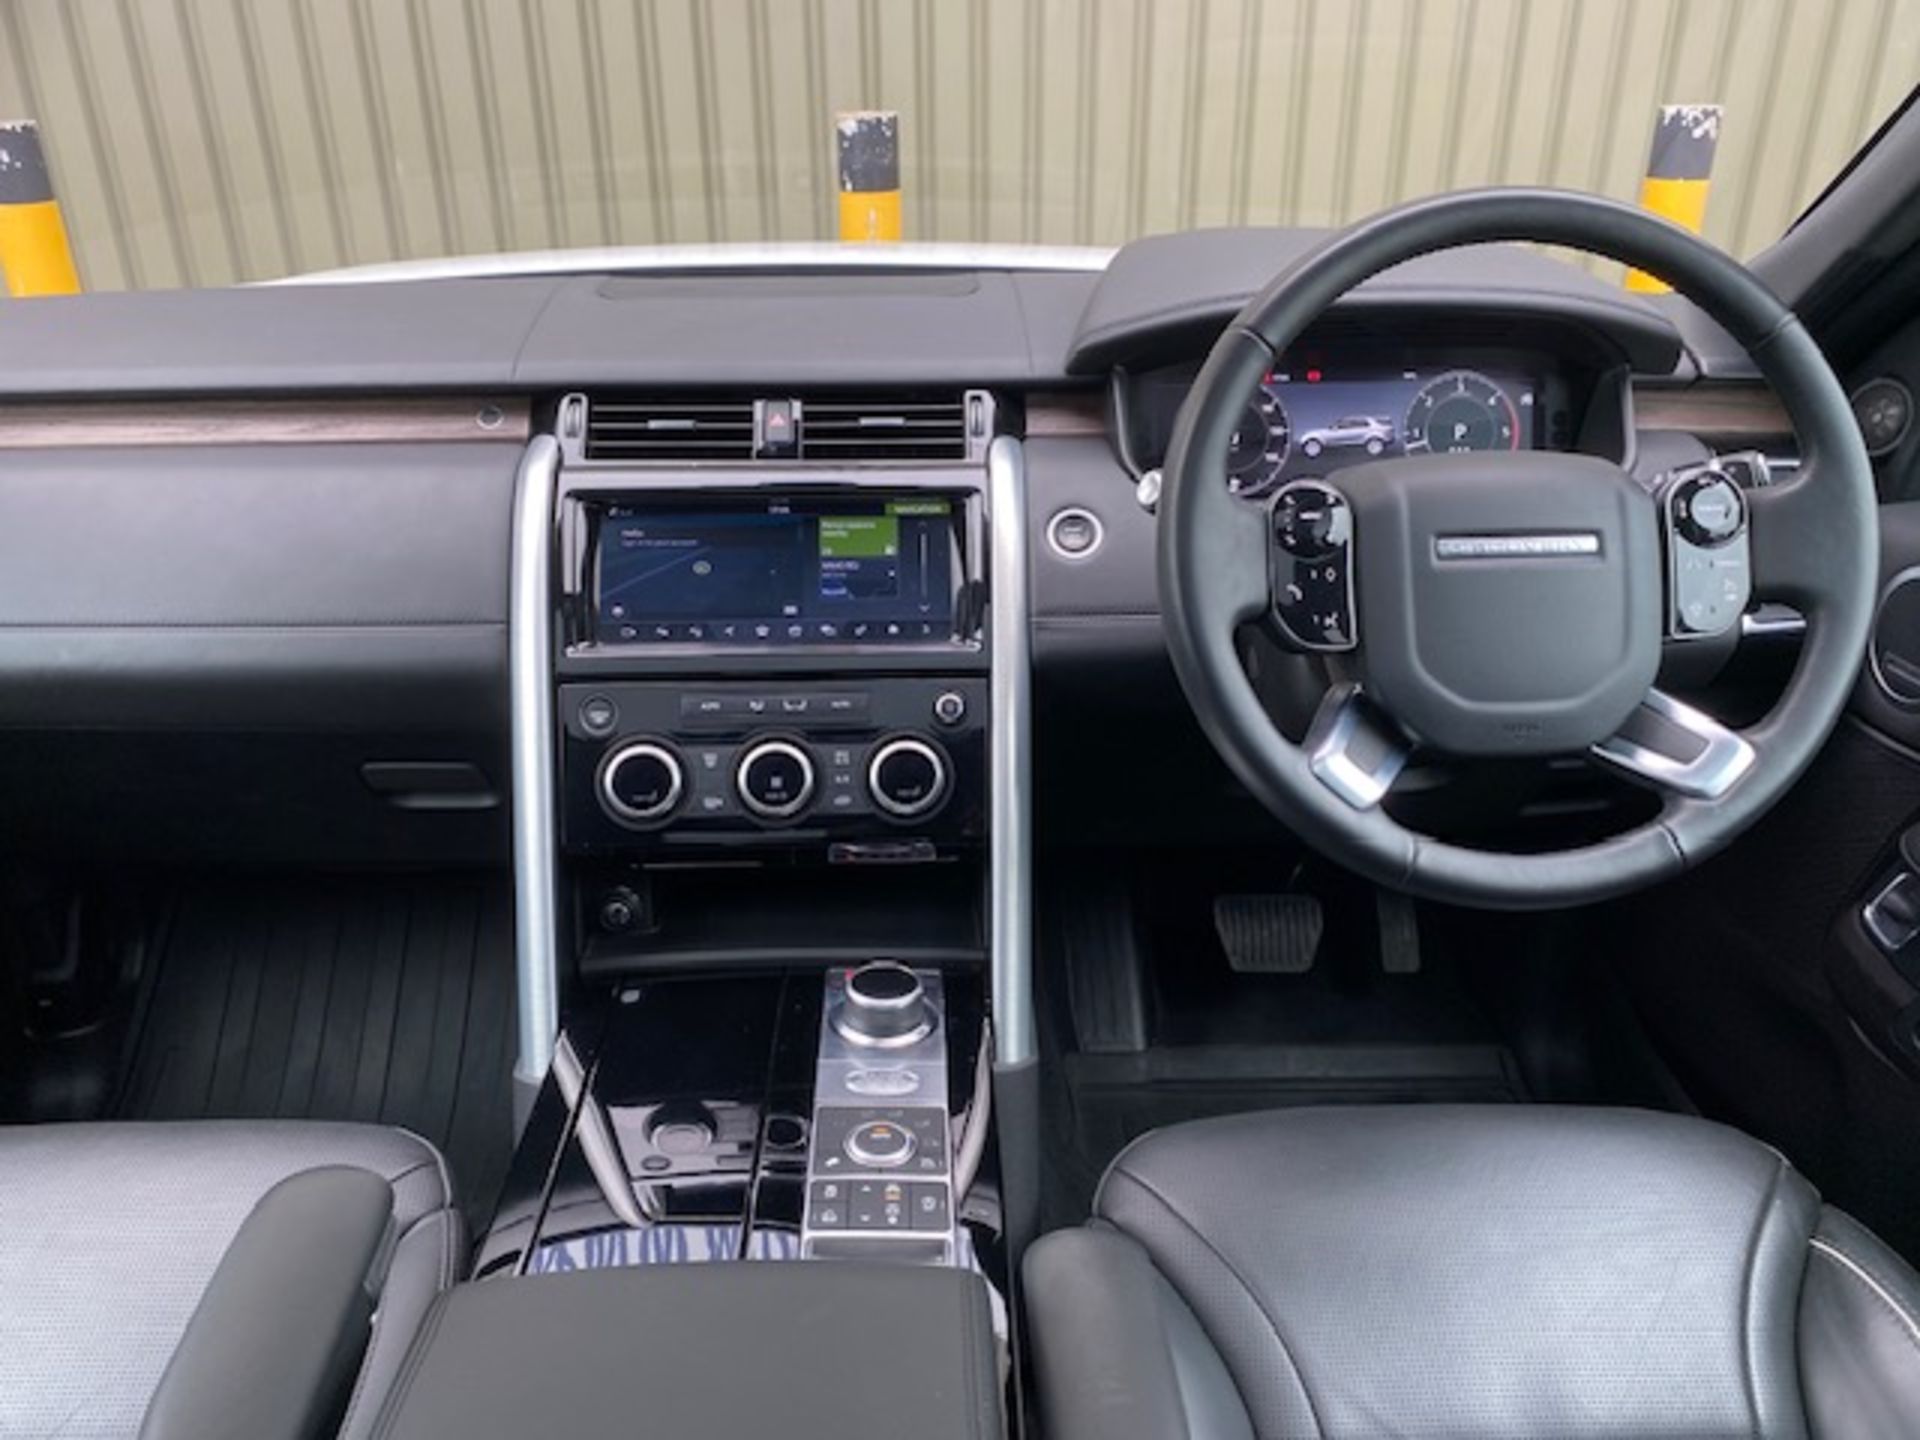 2019 model year Land Rover Discovery 5 3.0 TDV6 HSE Luxury RHD ONLY 5778 MILES! - Bild 14 aus 21